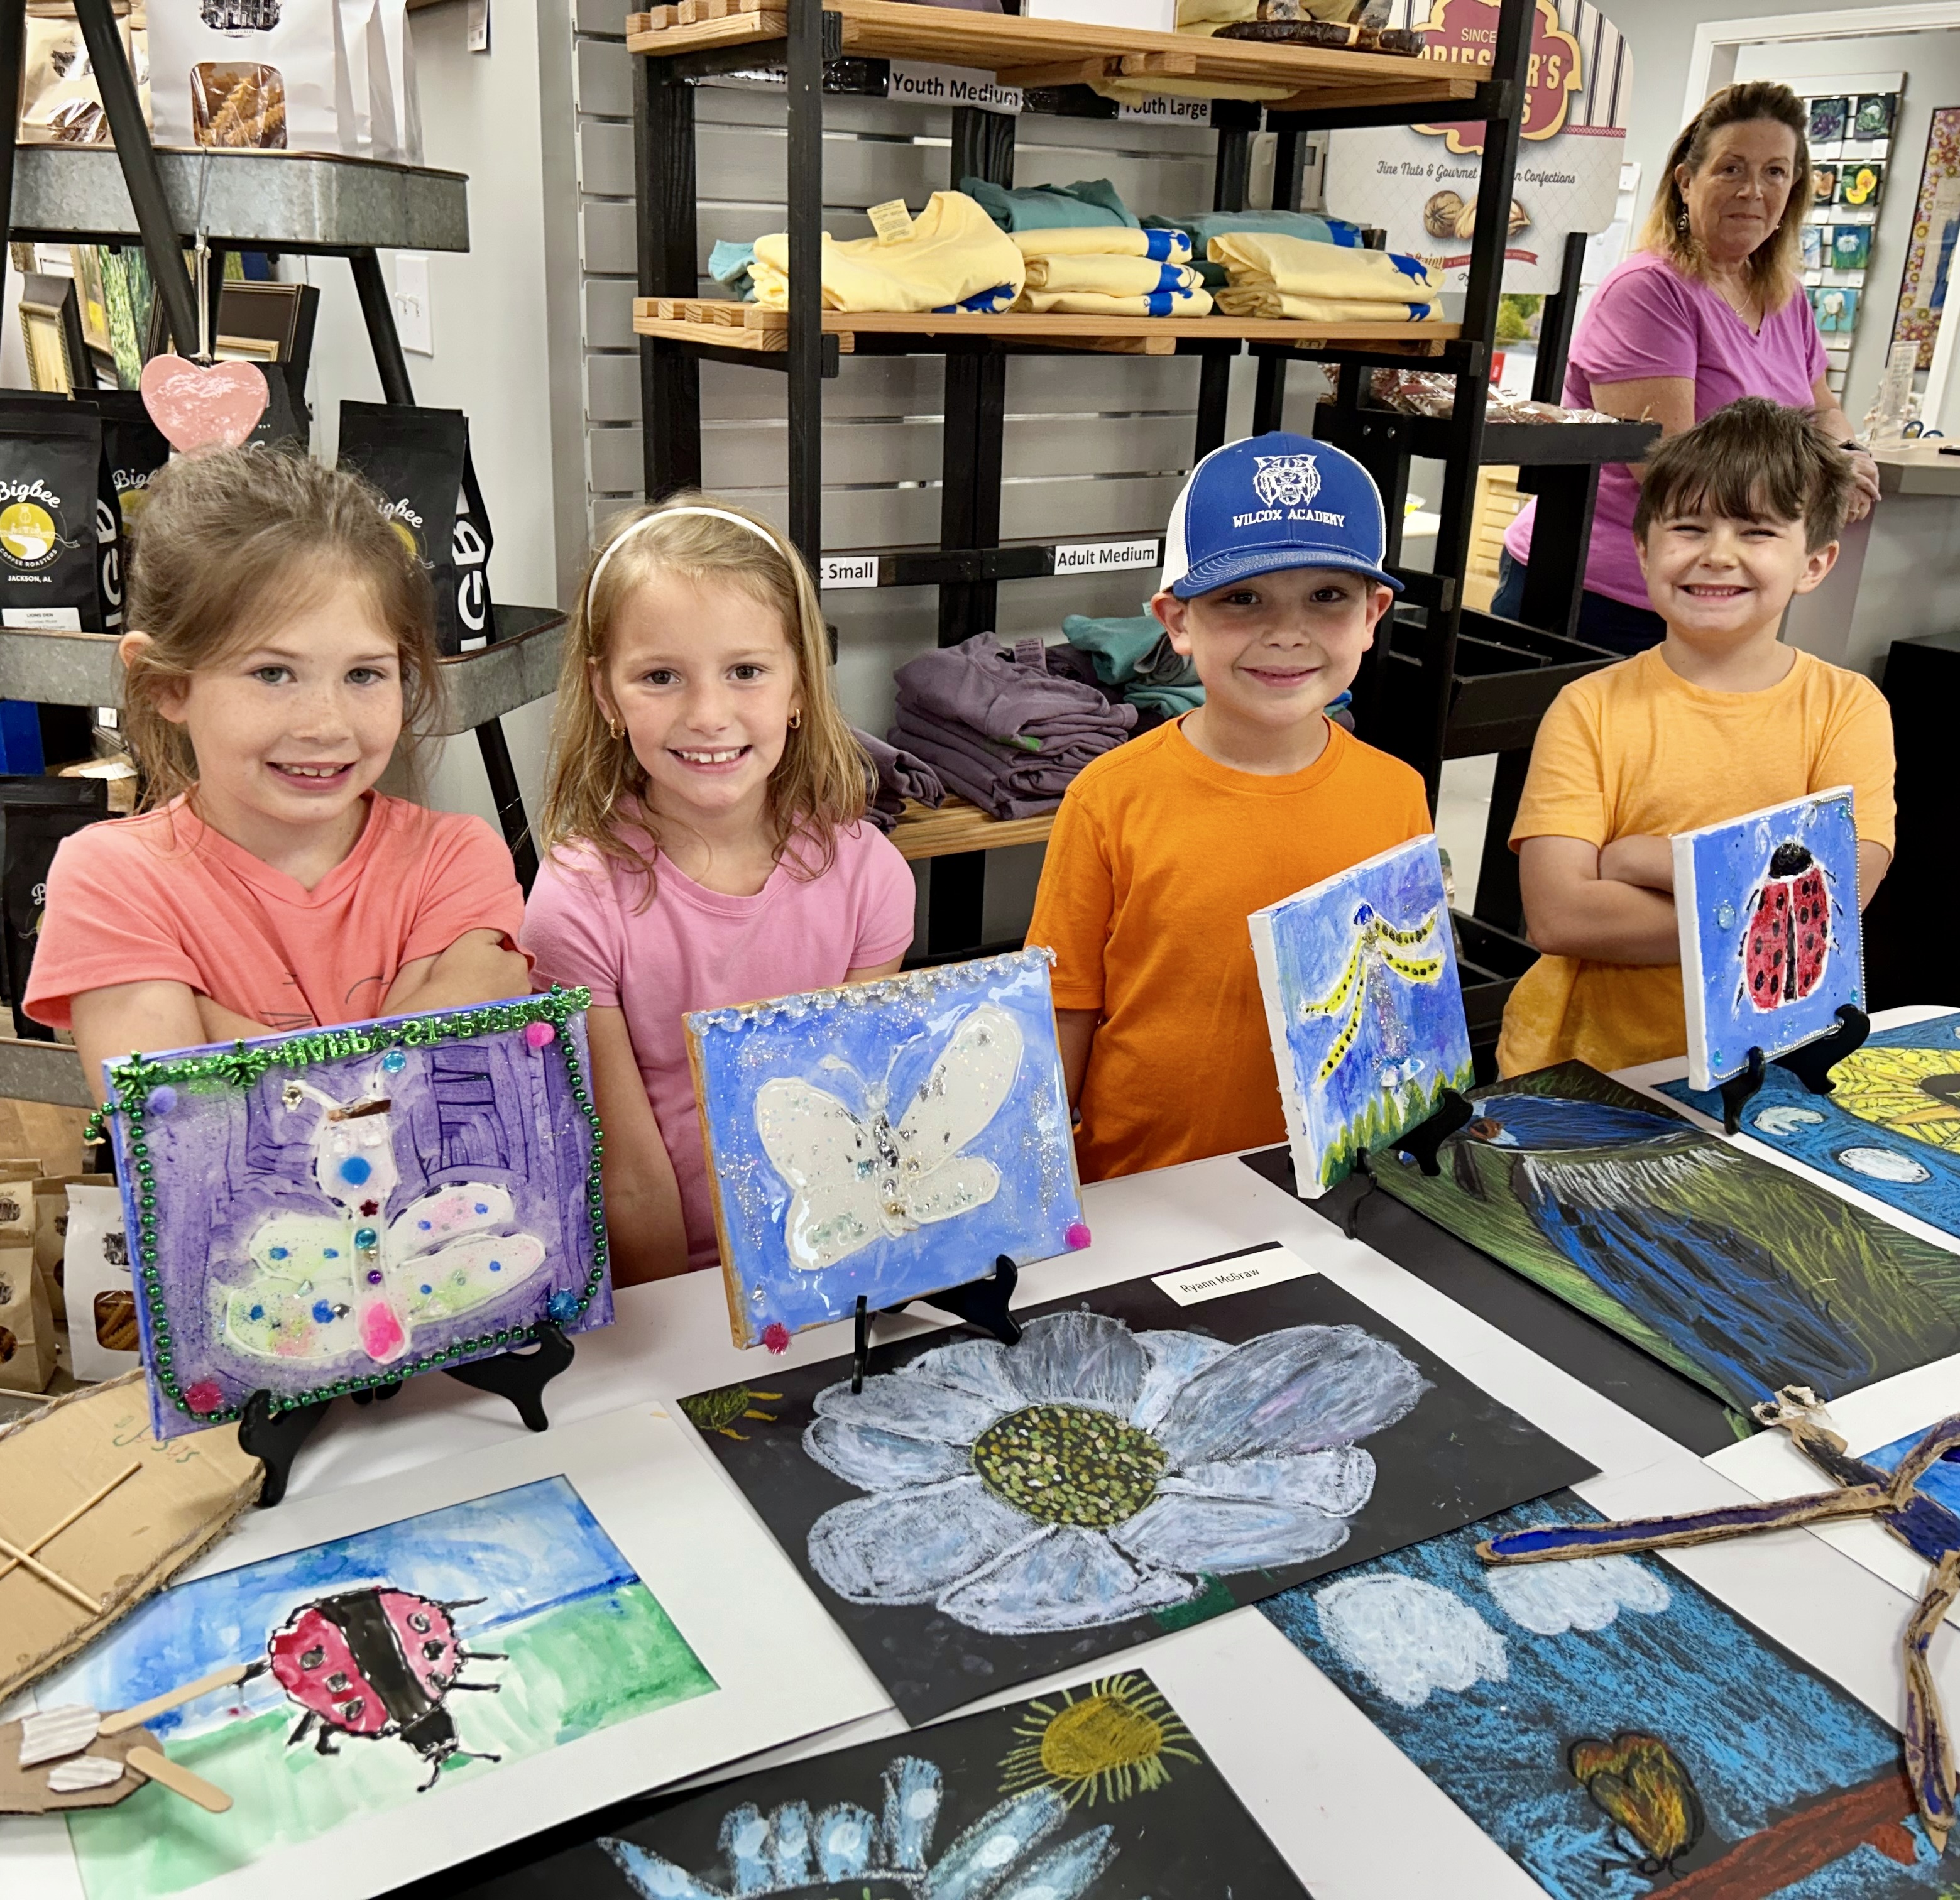 Pictured from left to right, Sutton McGraw, Ryann McGraw, Christopher Jordan, and Luke Hunter showcase the art they created throughout the week at the end during the end of camp week art exhibit.